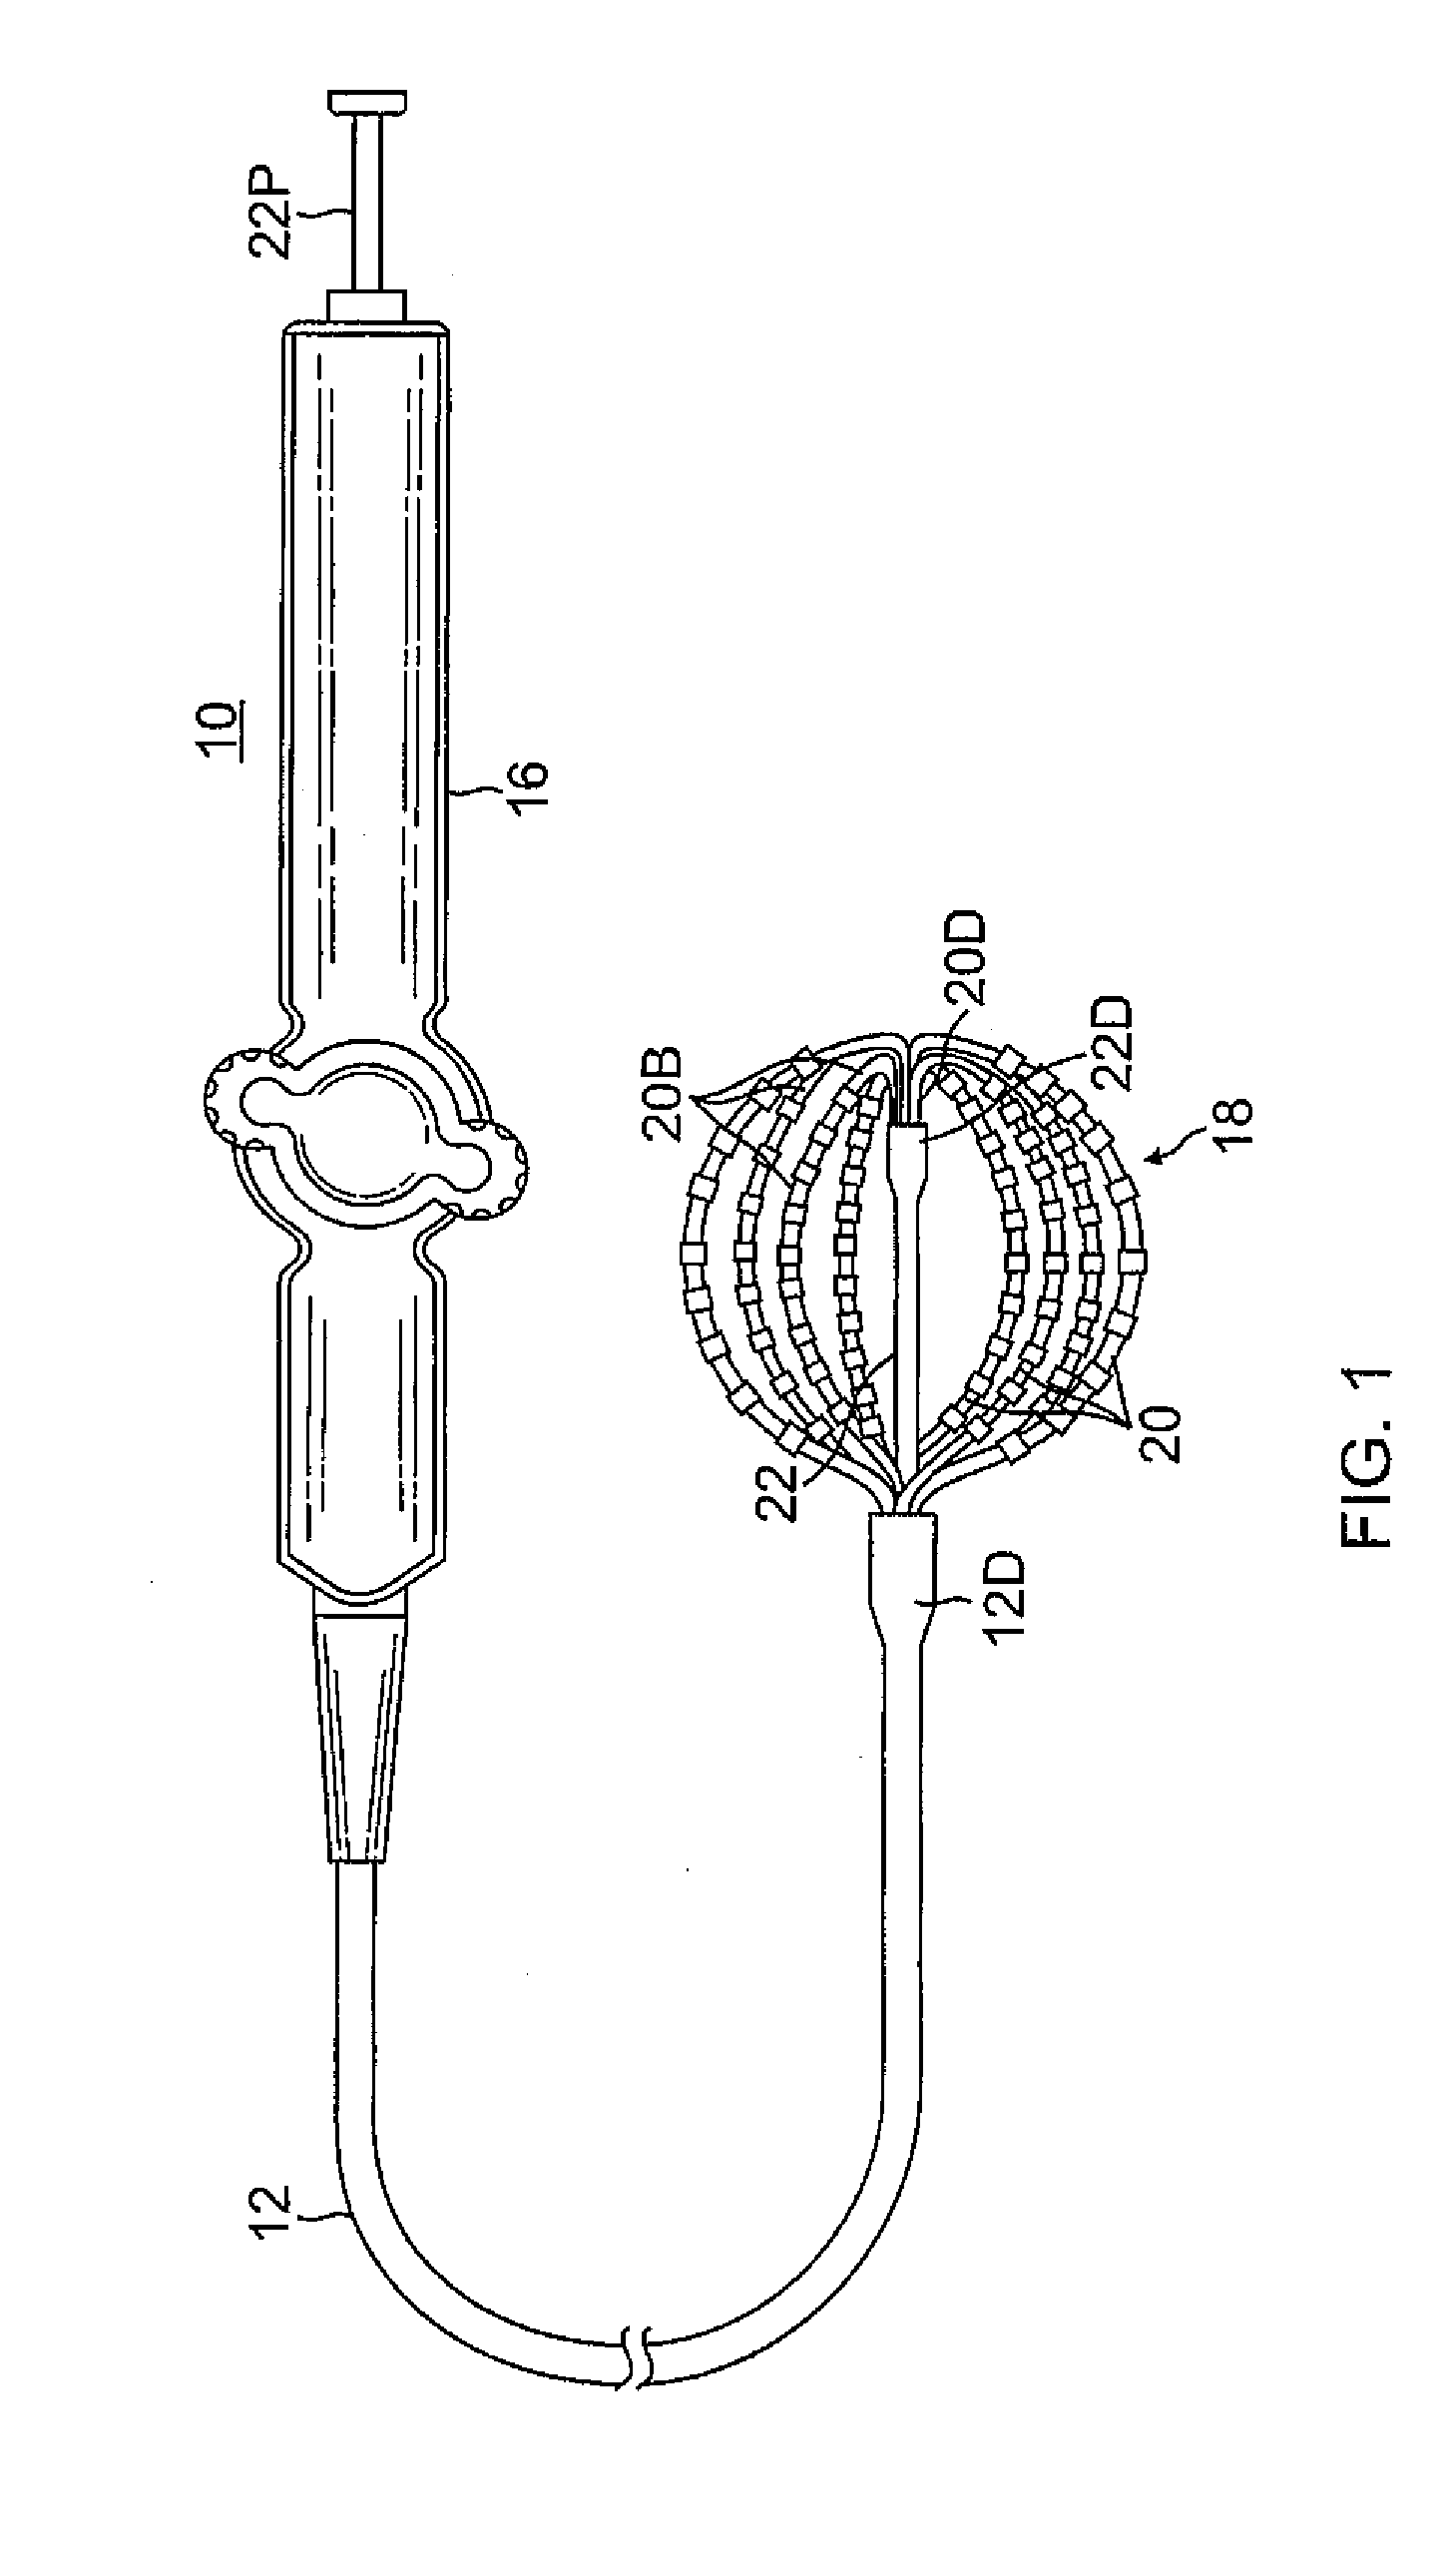 Basket catheter with deflectable spine